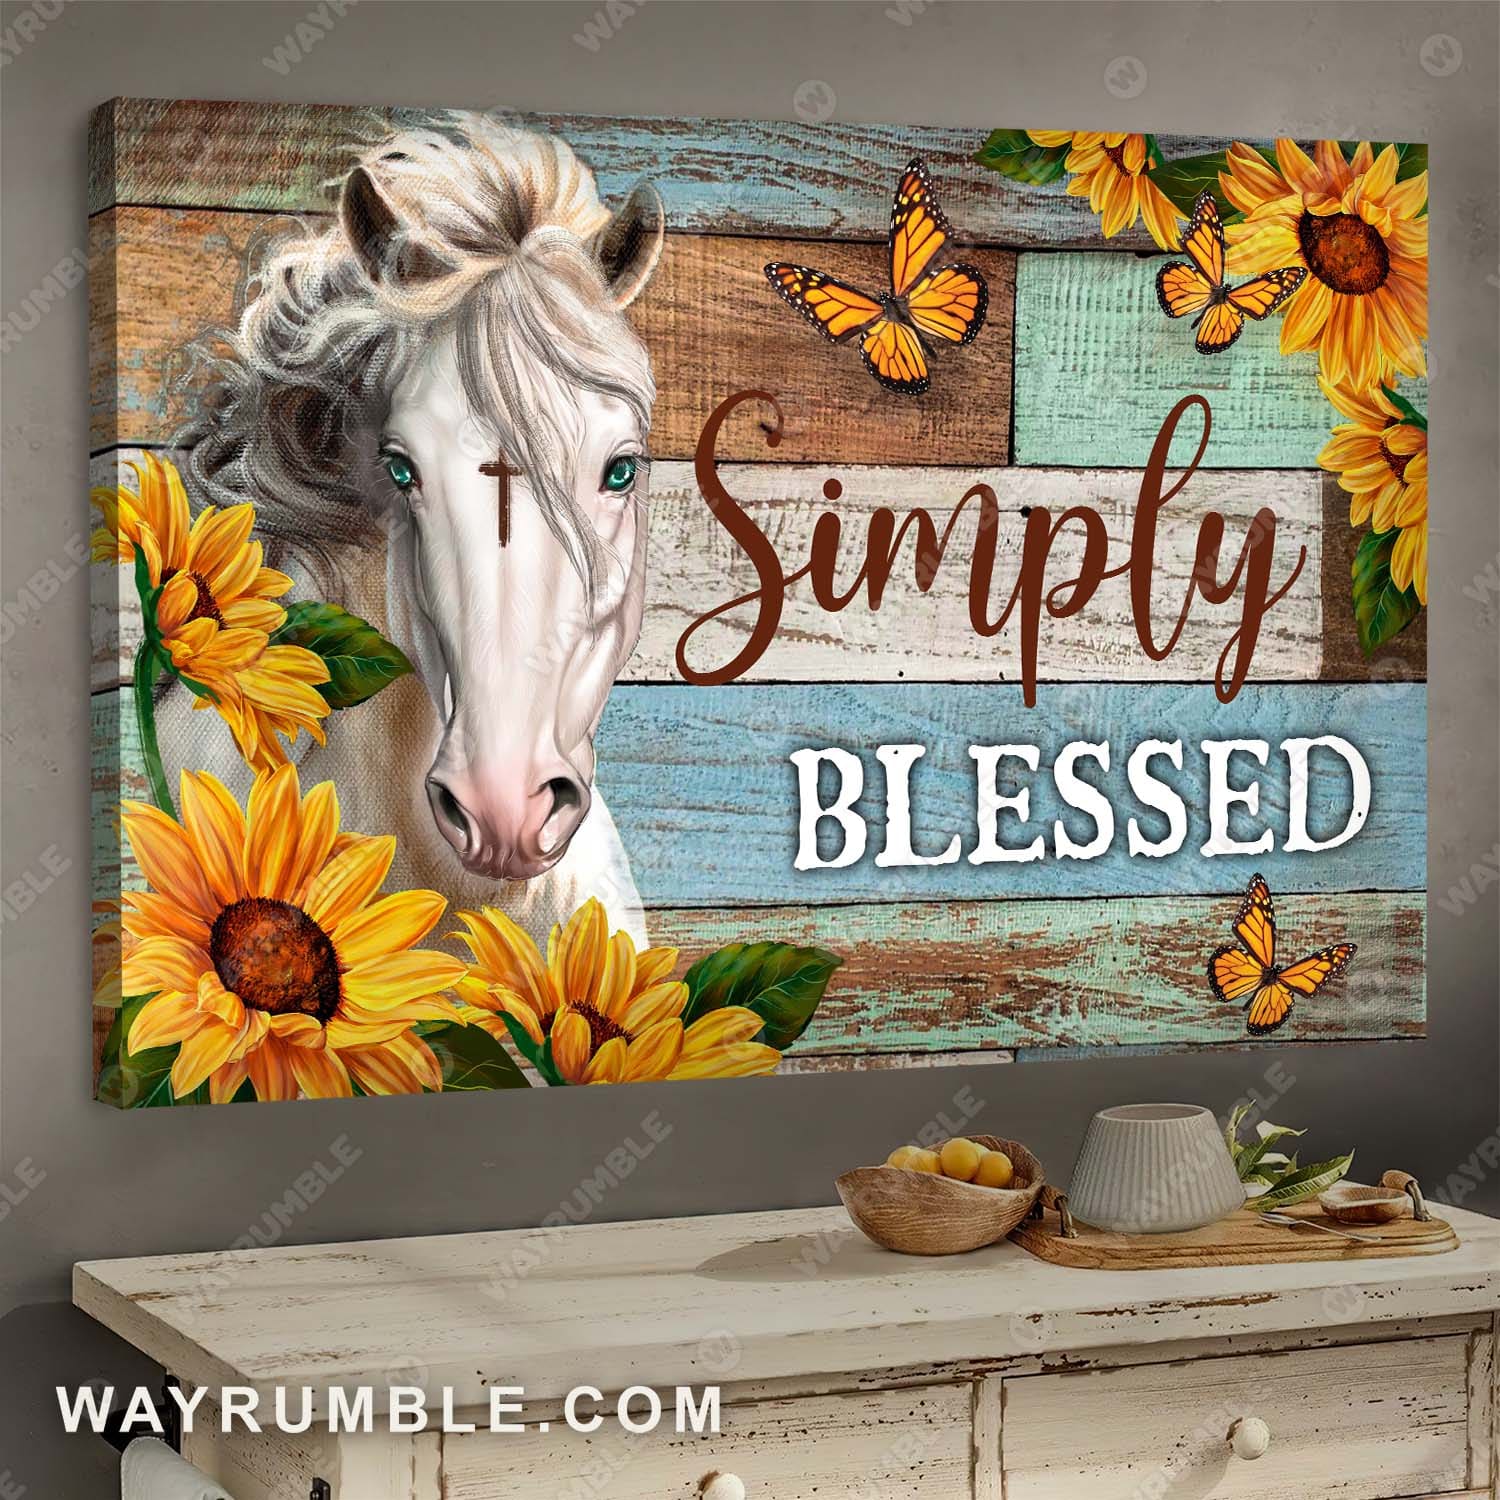 White horse painting, Simply blessed - Jesus Landscape Canvas Prints, Wall Art